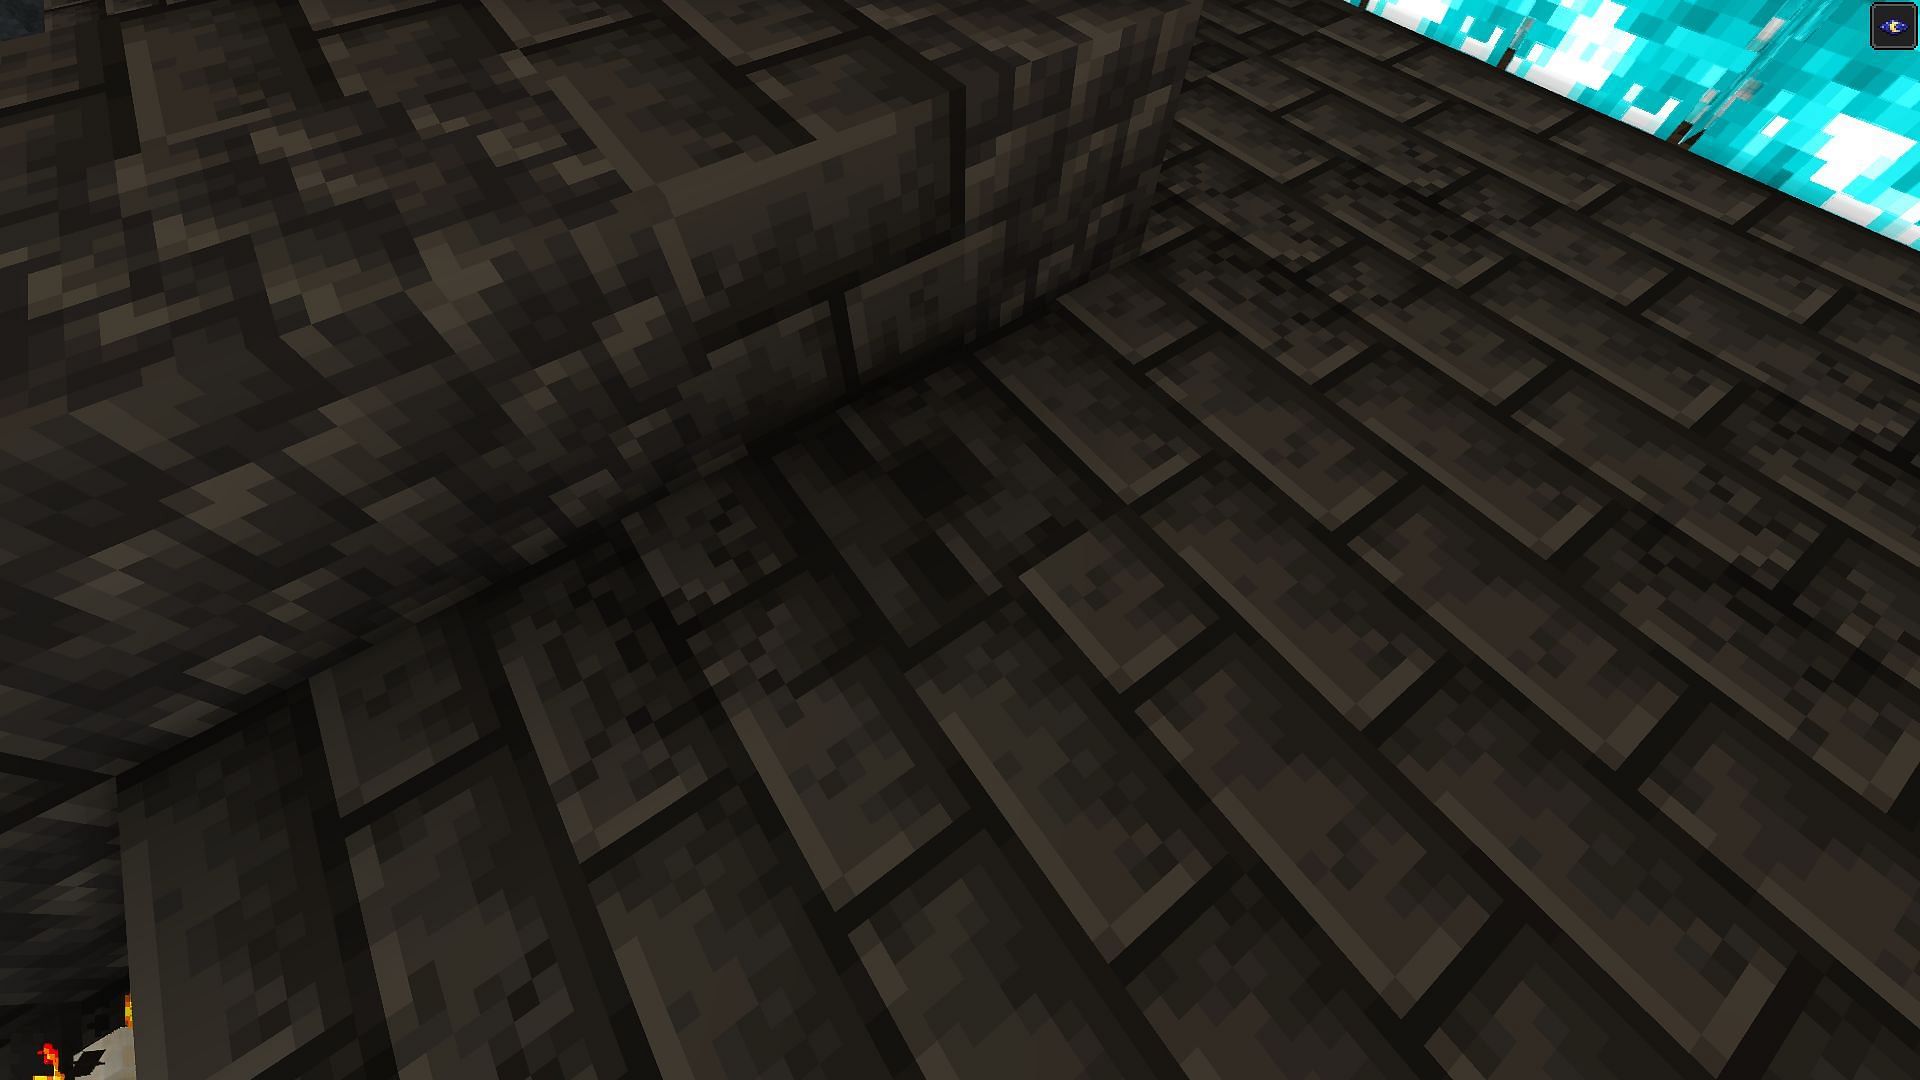 The chiseled deepslate texture that users are looking for (Image via Minecraft)